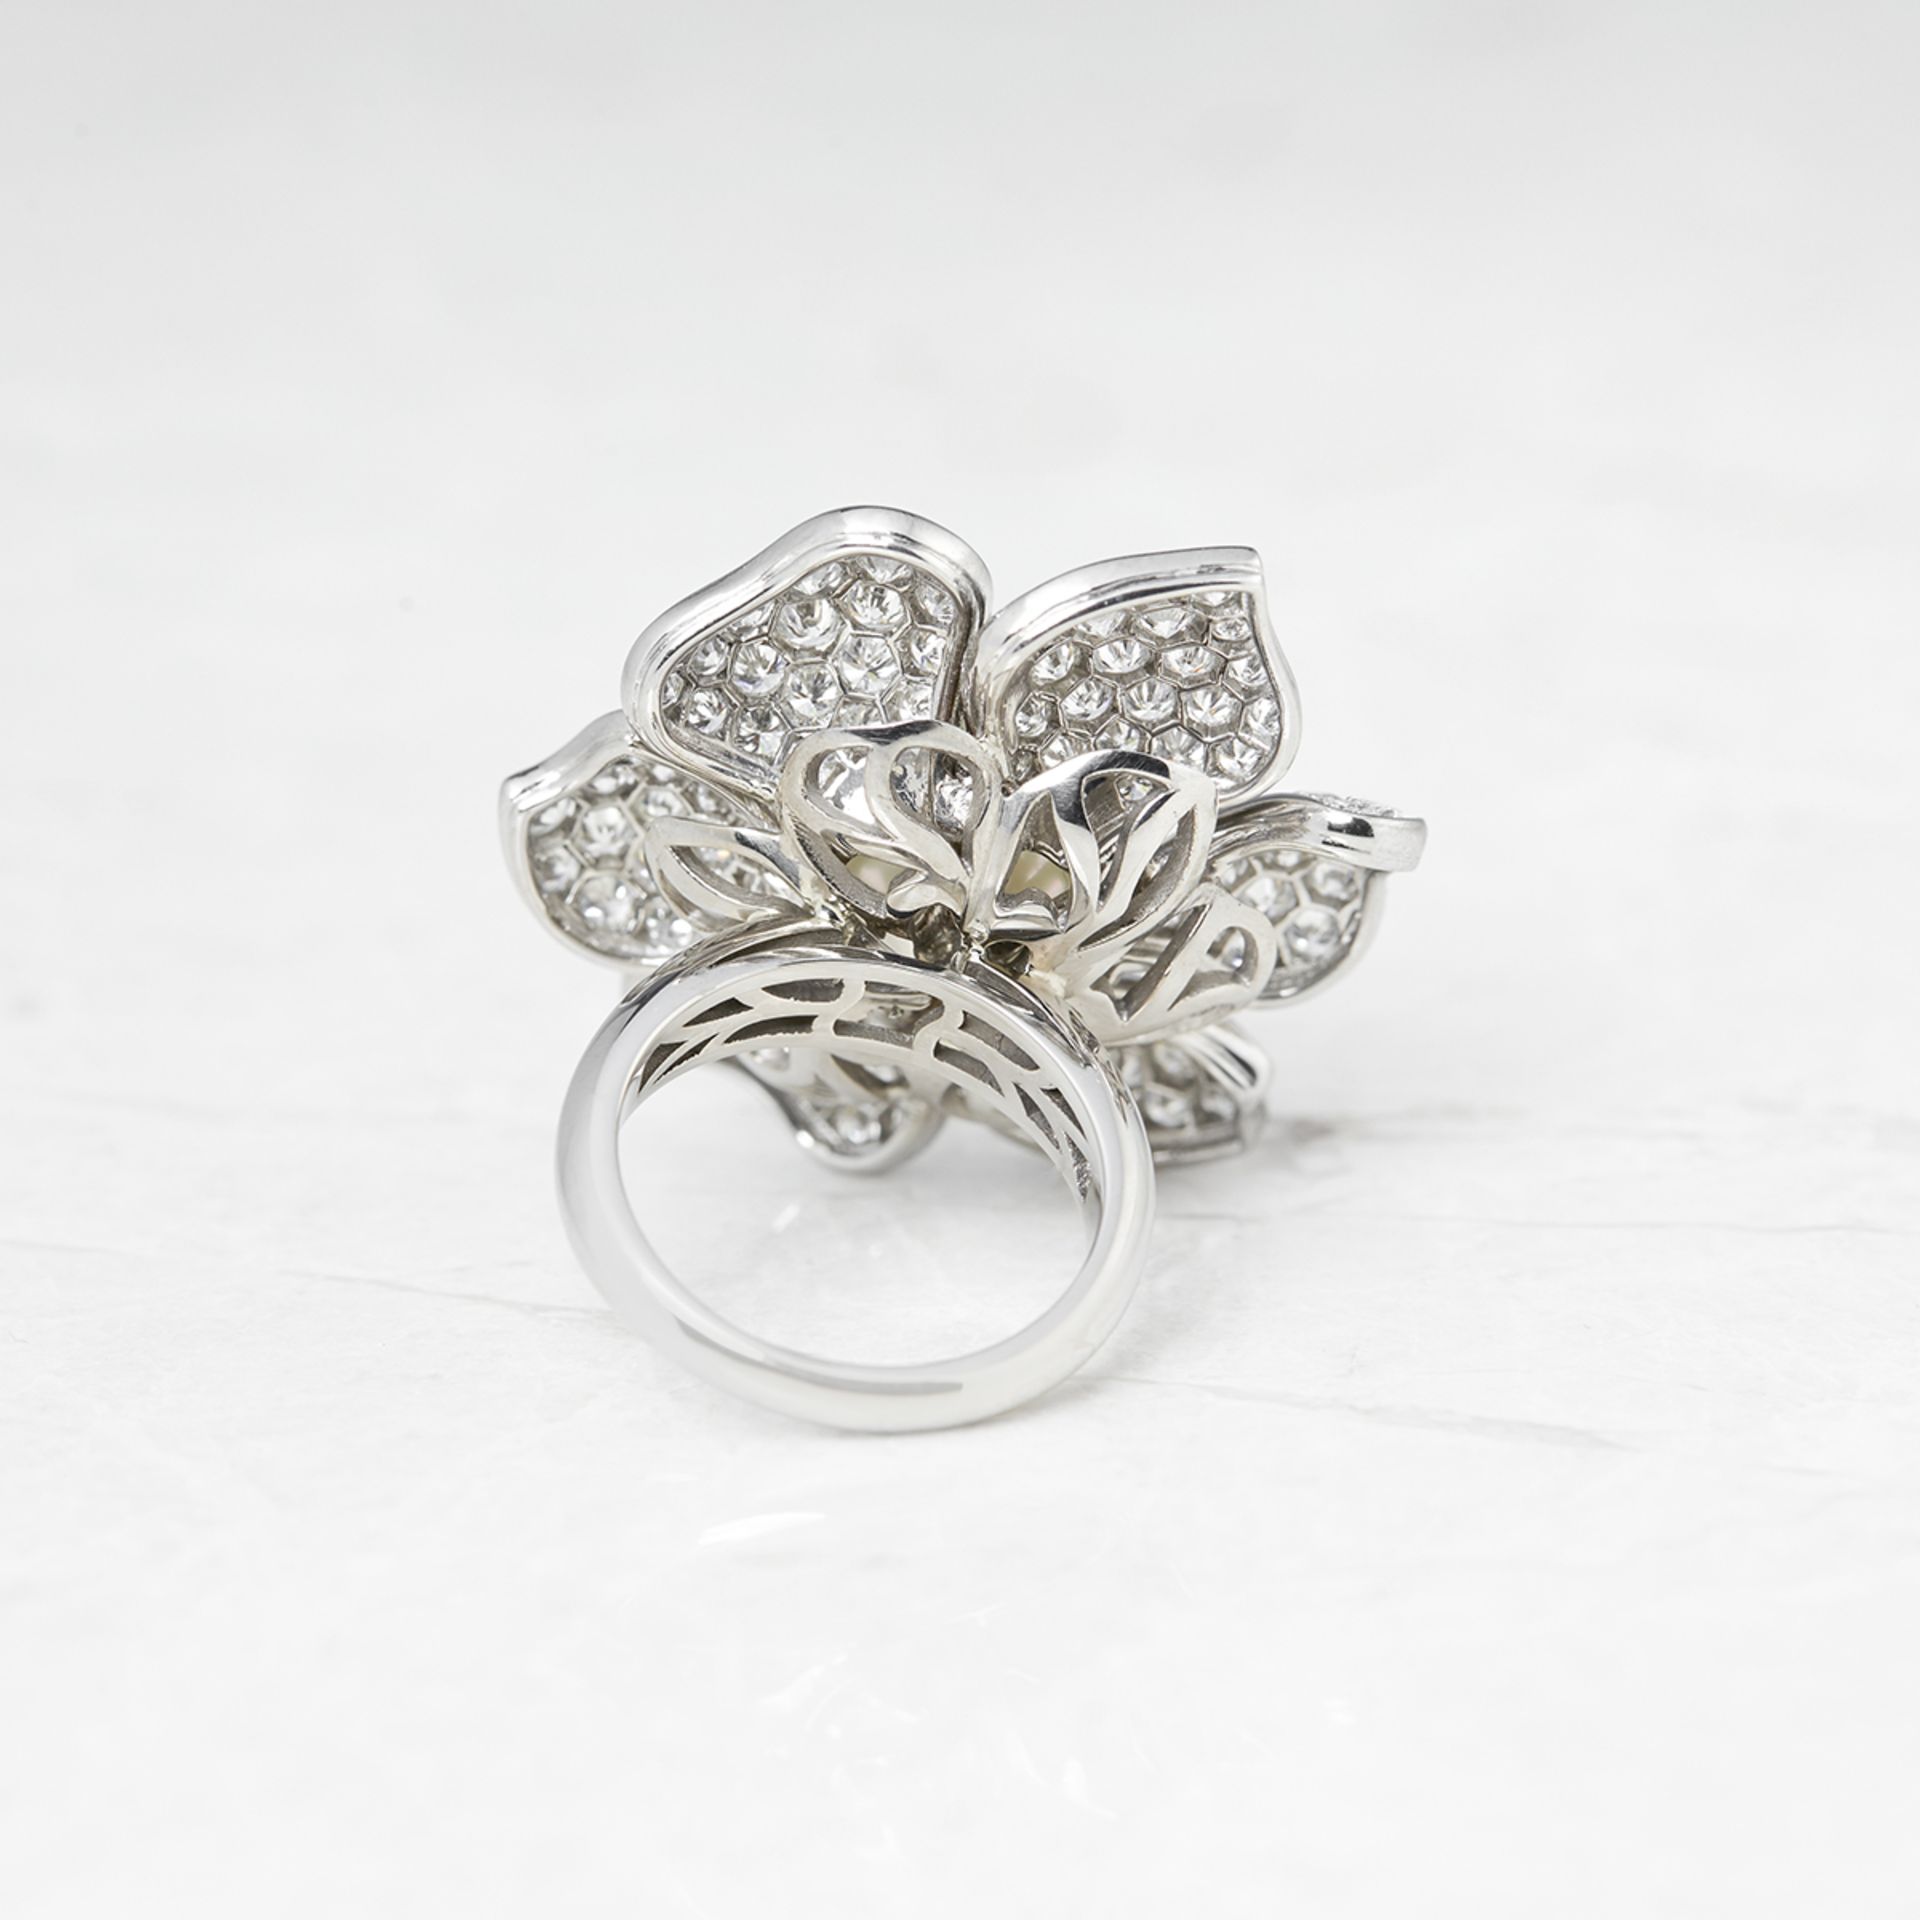 Picchiotti 18k White Gold South Sea Pearl & 3.60ct Diamond Flower Design Cocktail Ring - Image 6 of 6